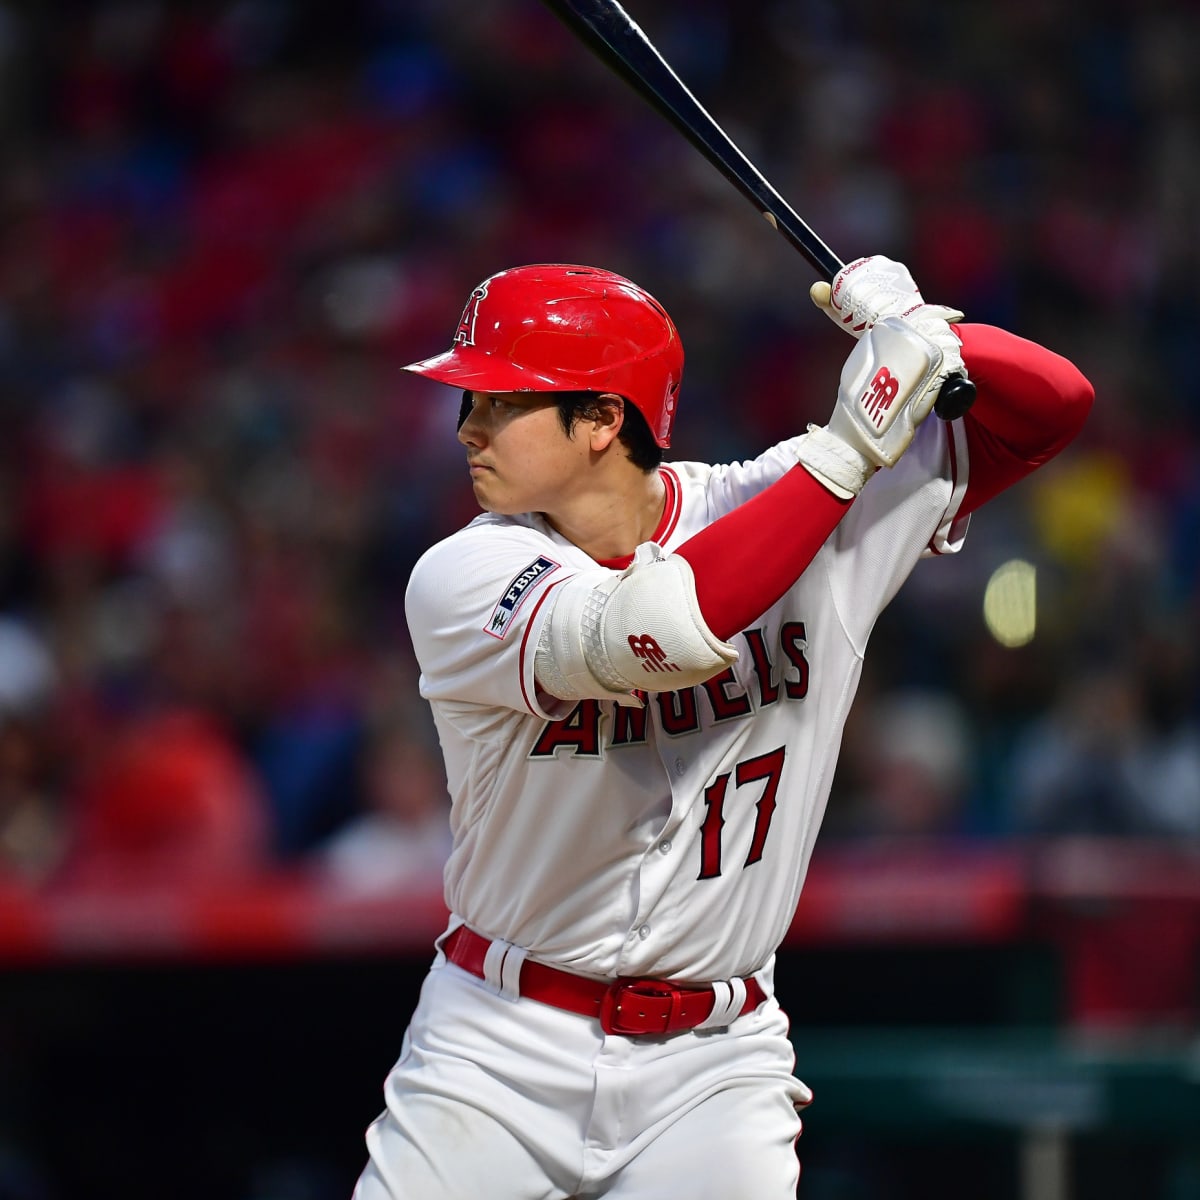 Ohtani Fans 11, But Seager, Lowe Lead Texas to 2-0 Win - Bloomberg